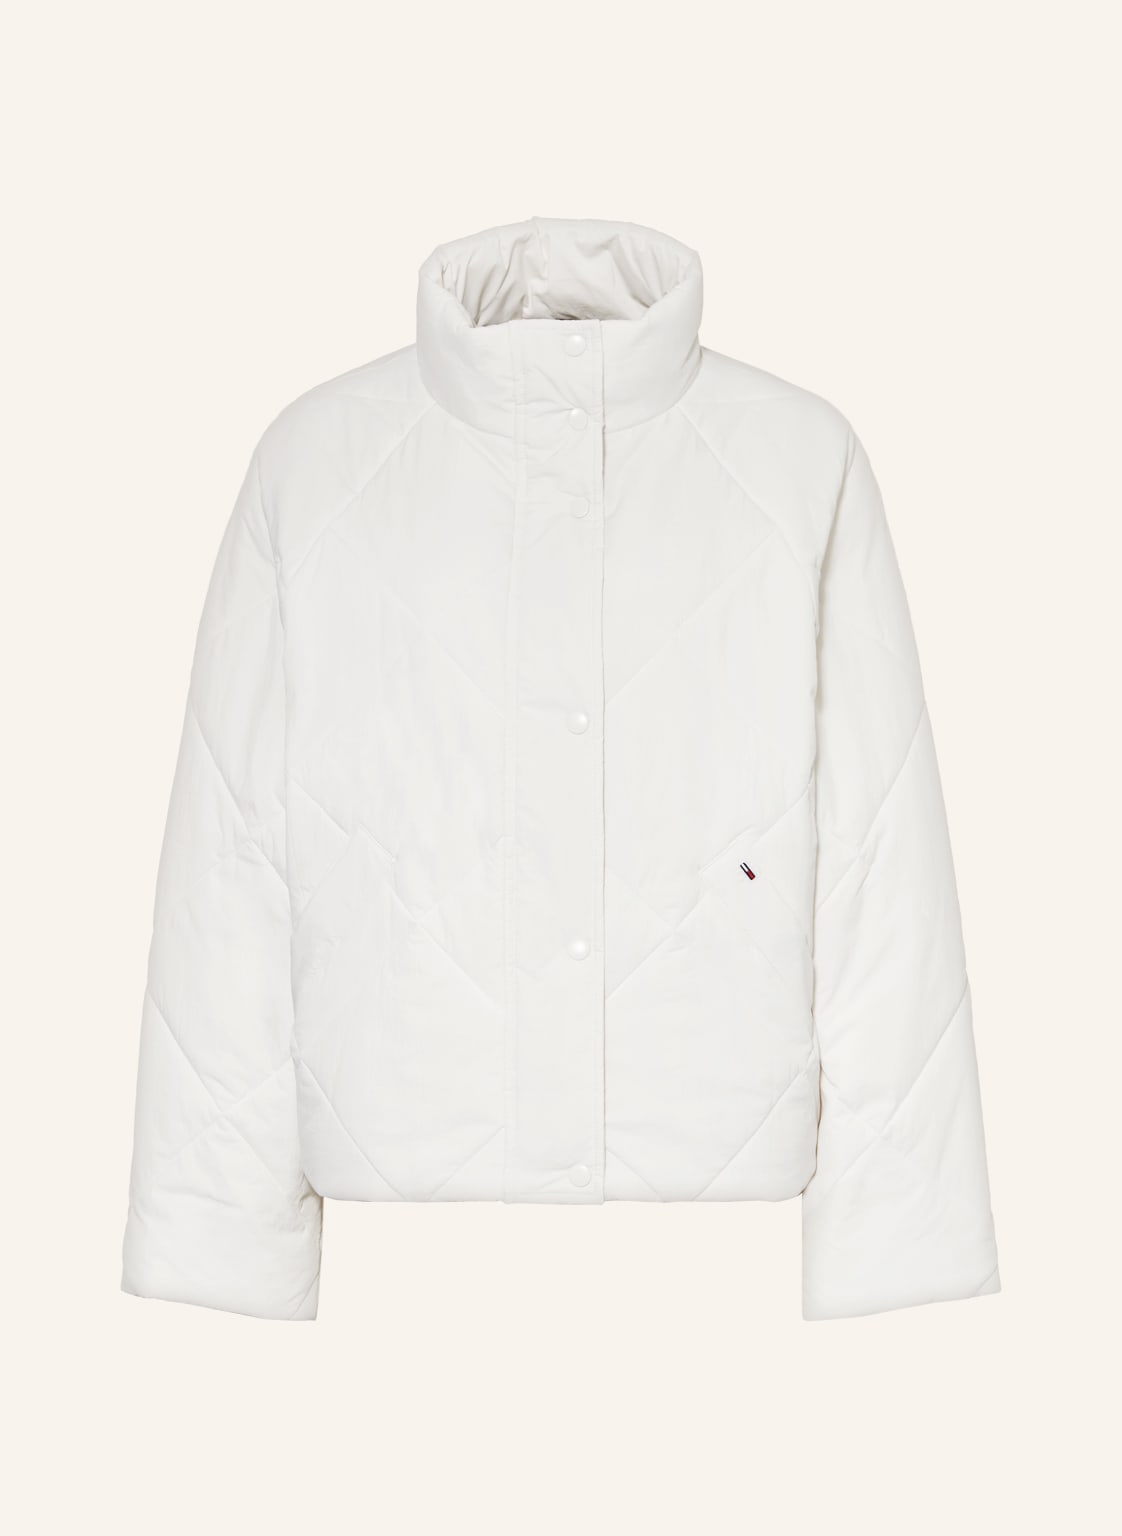 Tommy Jeans Steppjacke weiss von Tommy Jeans